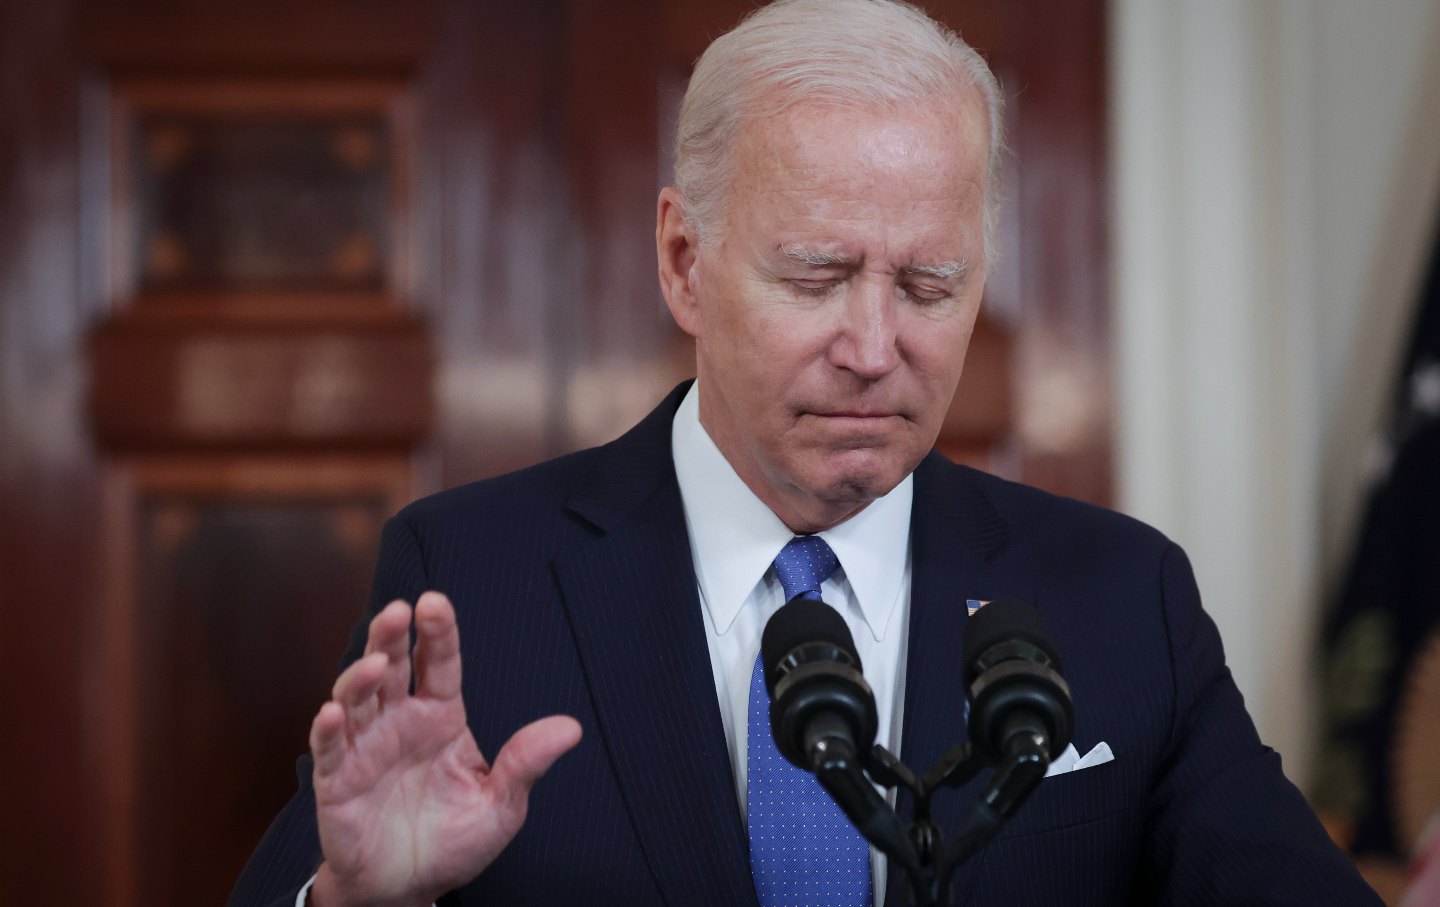 Joe Biden holds up his hand and closes his eyes while addressing the Supreme Court’s decision on Dobbs in Washington D.C.